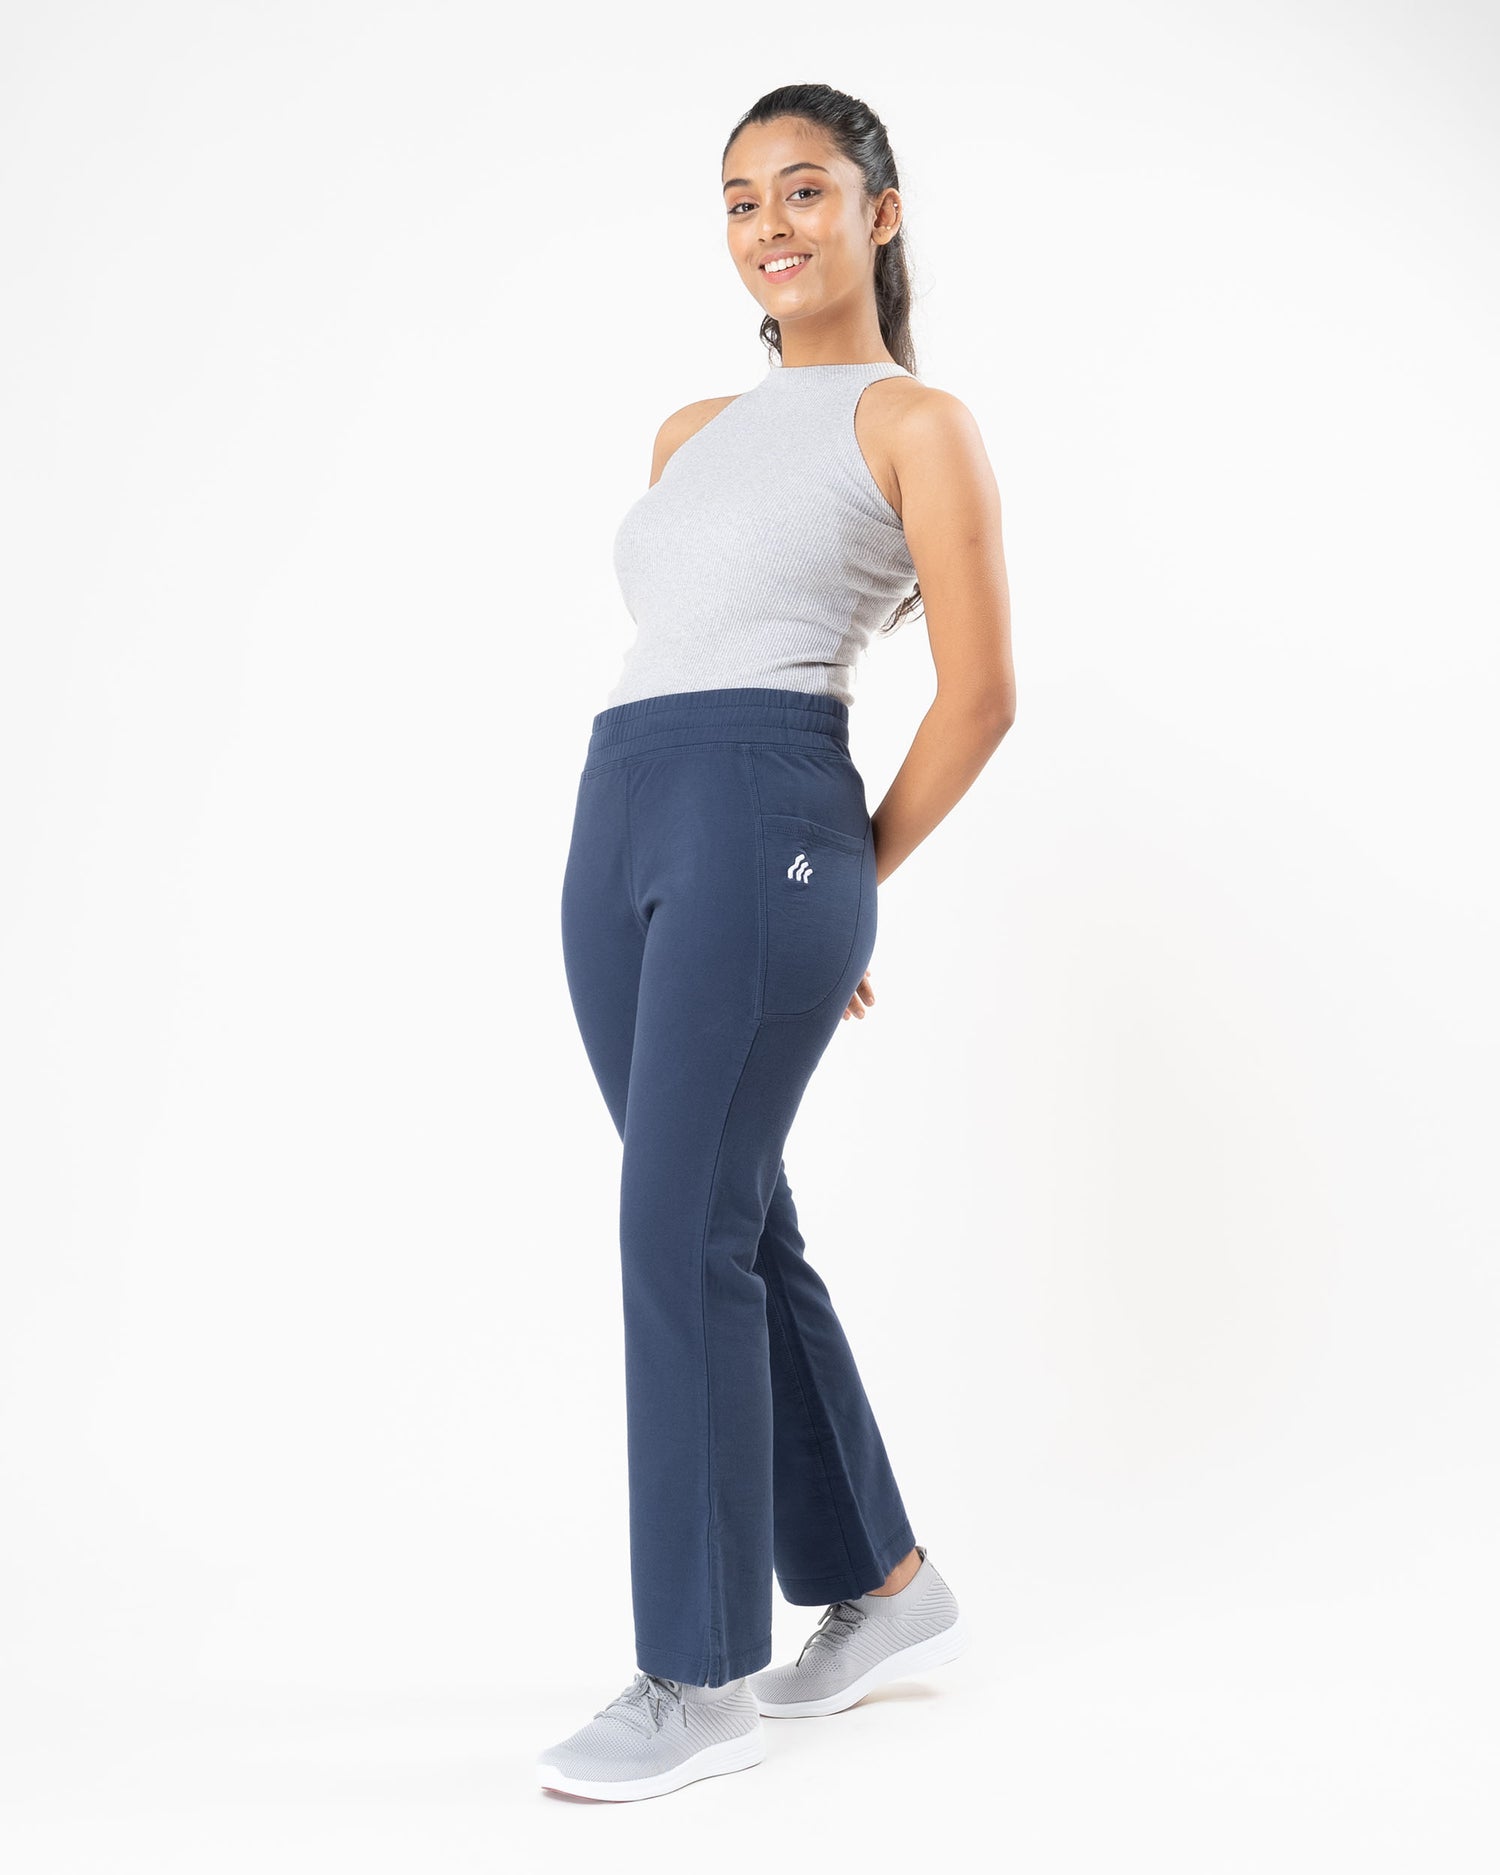 Women's Pants, both chic and casual | Hartford